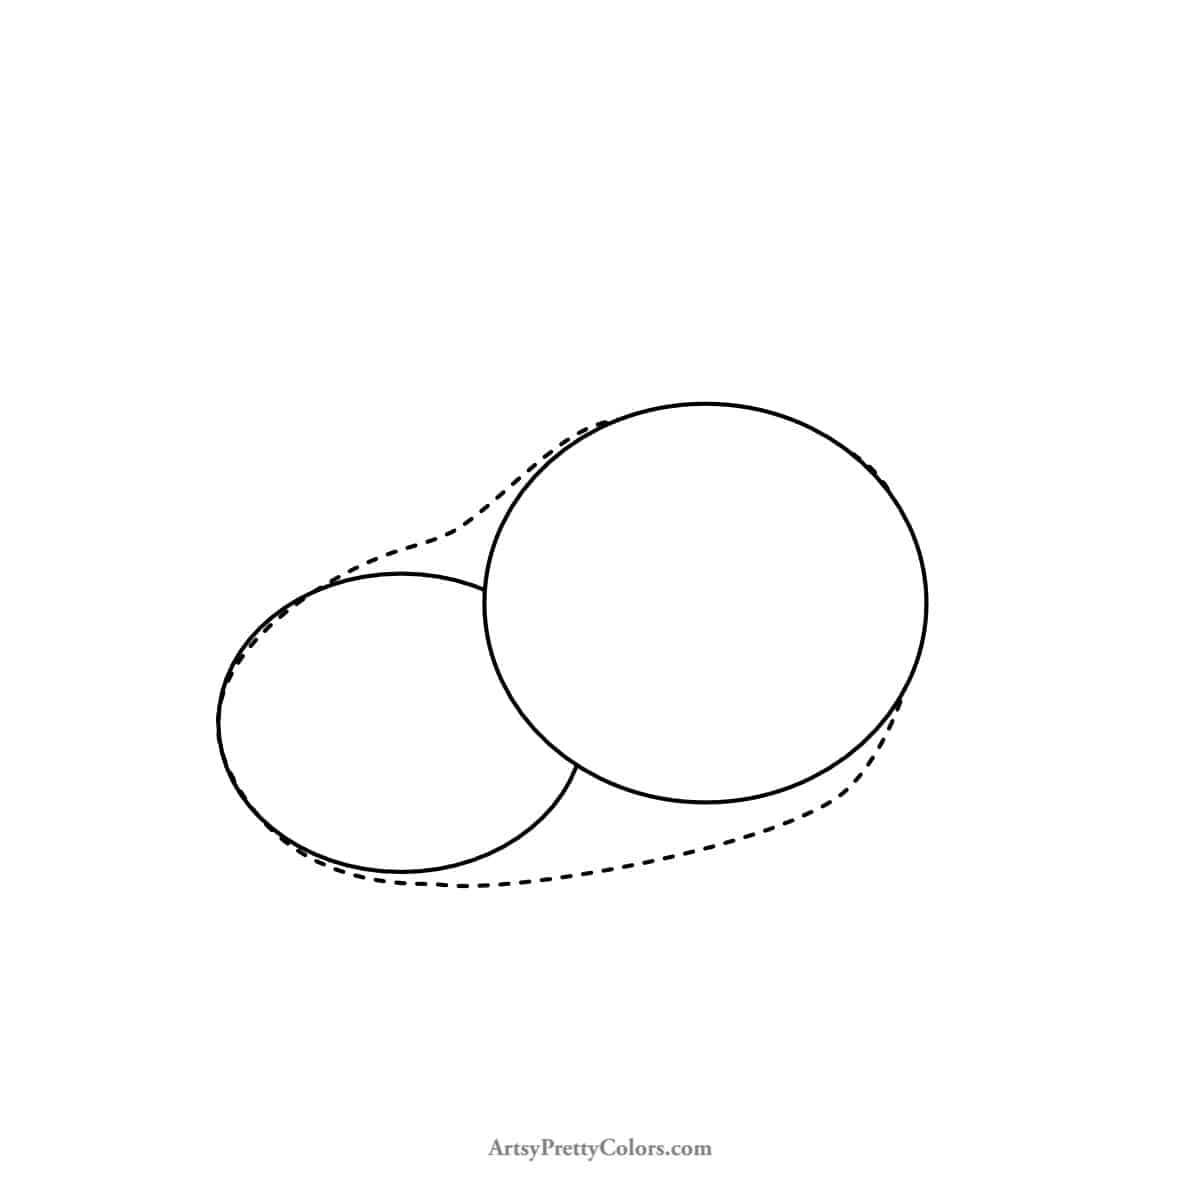 connecting the circles to make the body shape